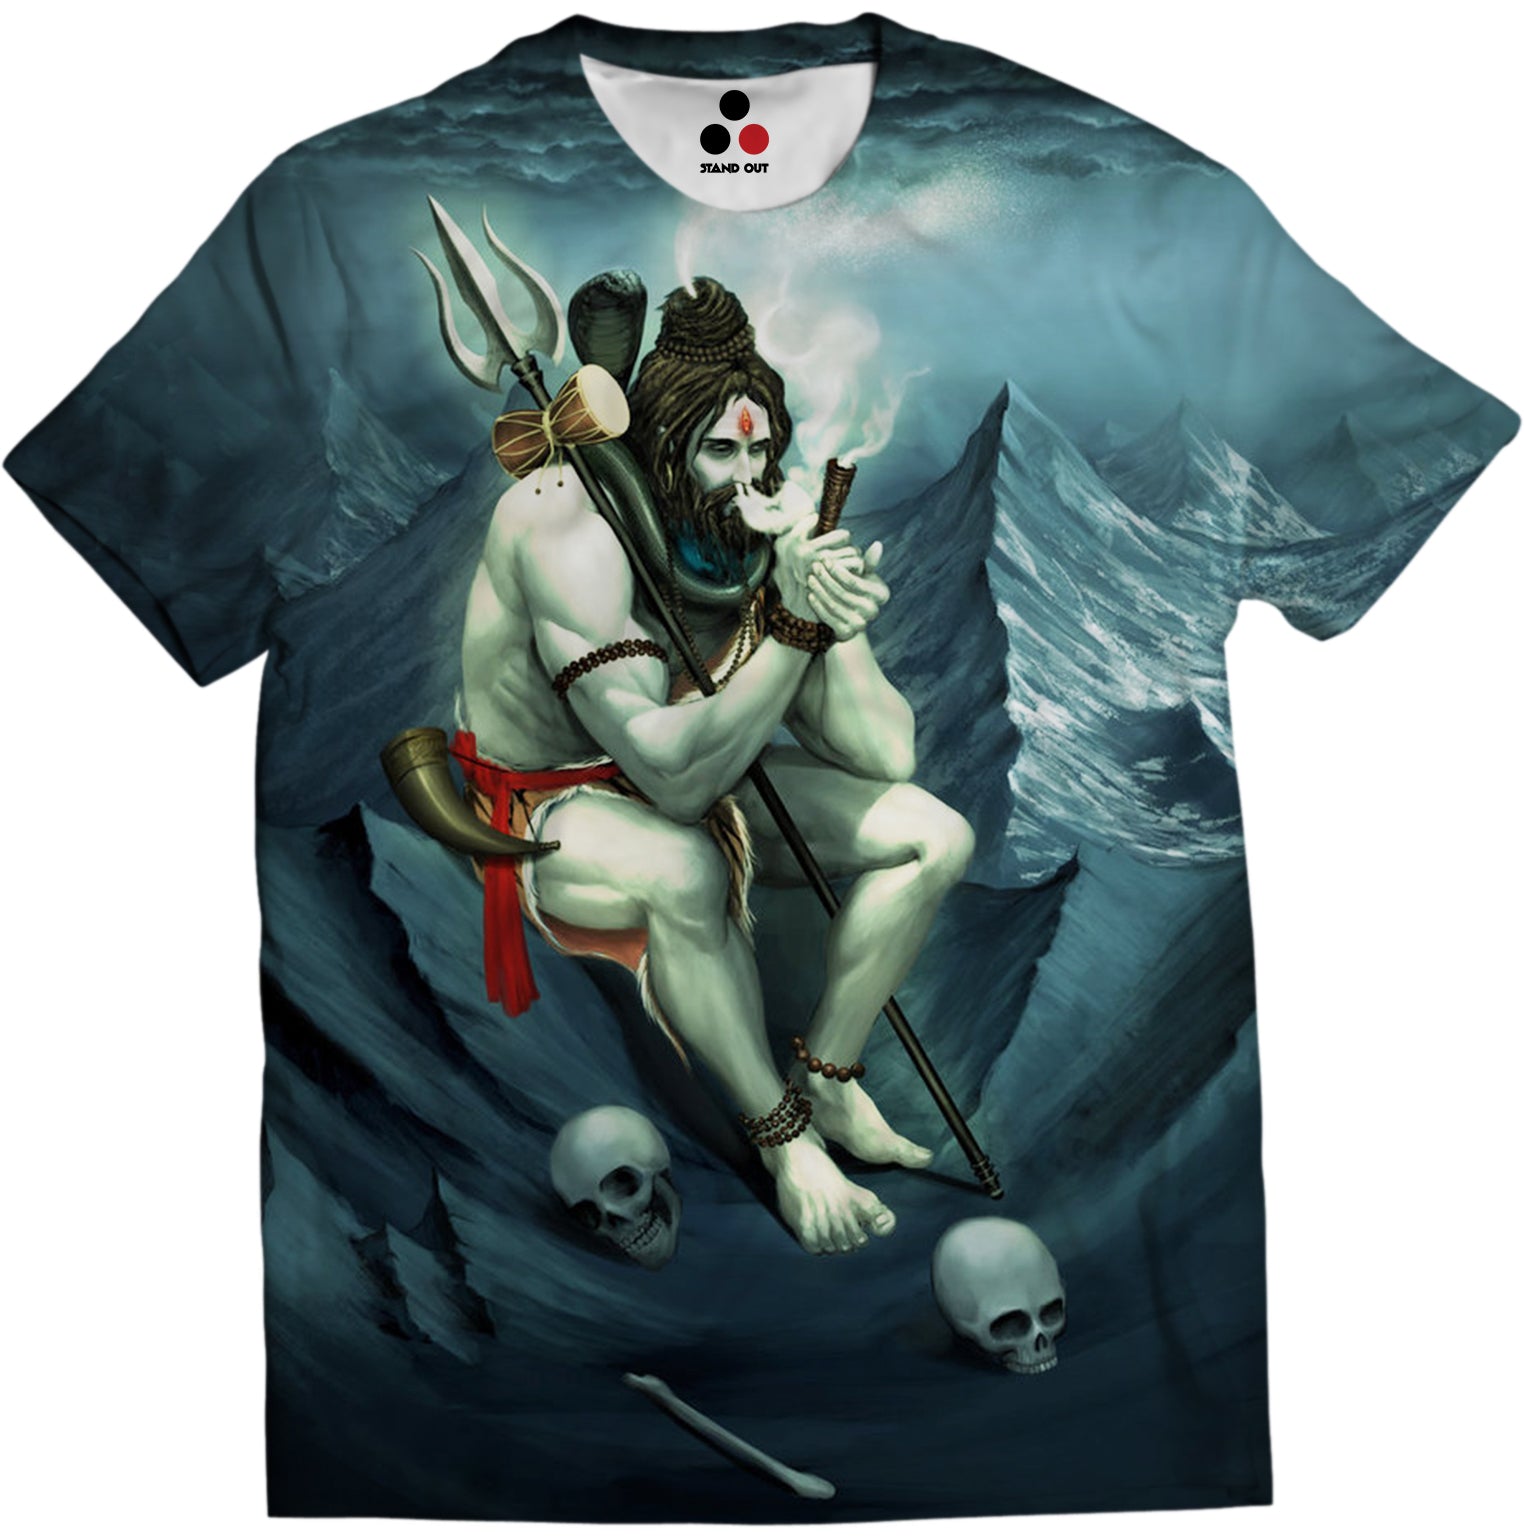 shiva smoking ganja smoking shiva t shirt Image of hindu god lord shiva smoking weed from chillum is printed on a premium polyester t shirt. This is an all over print tshirt hence the image covers both front and back this product is sold worldwide by standout shipped from india. visit www.standoutforever.com